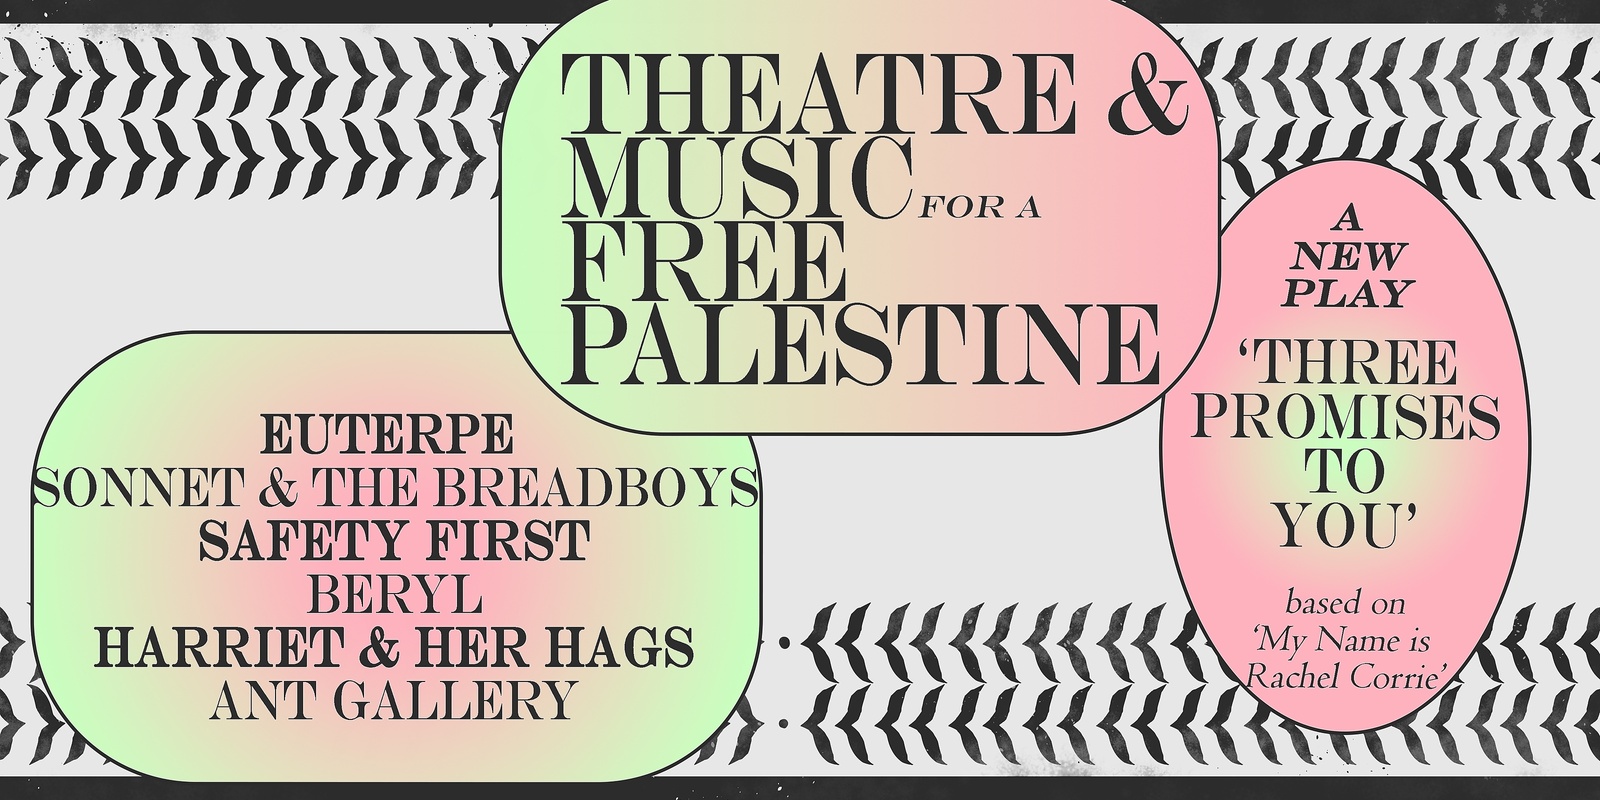 Banner image for Theatre & Music for a Free Palestine